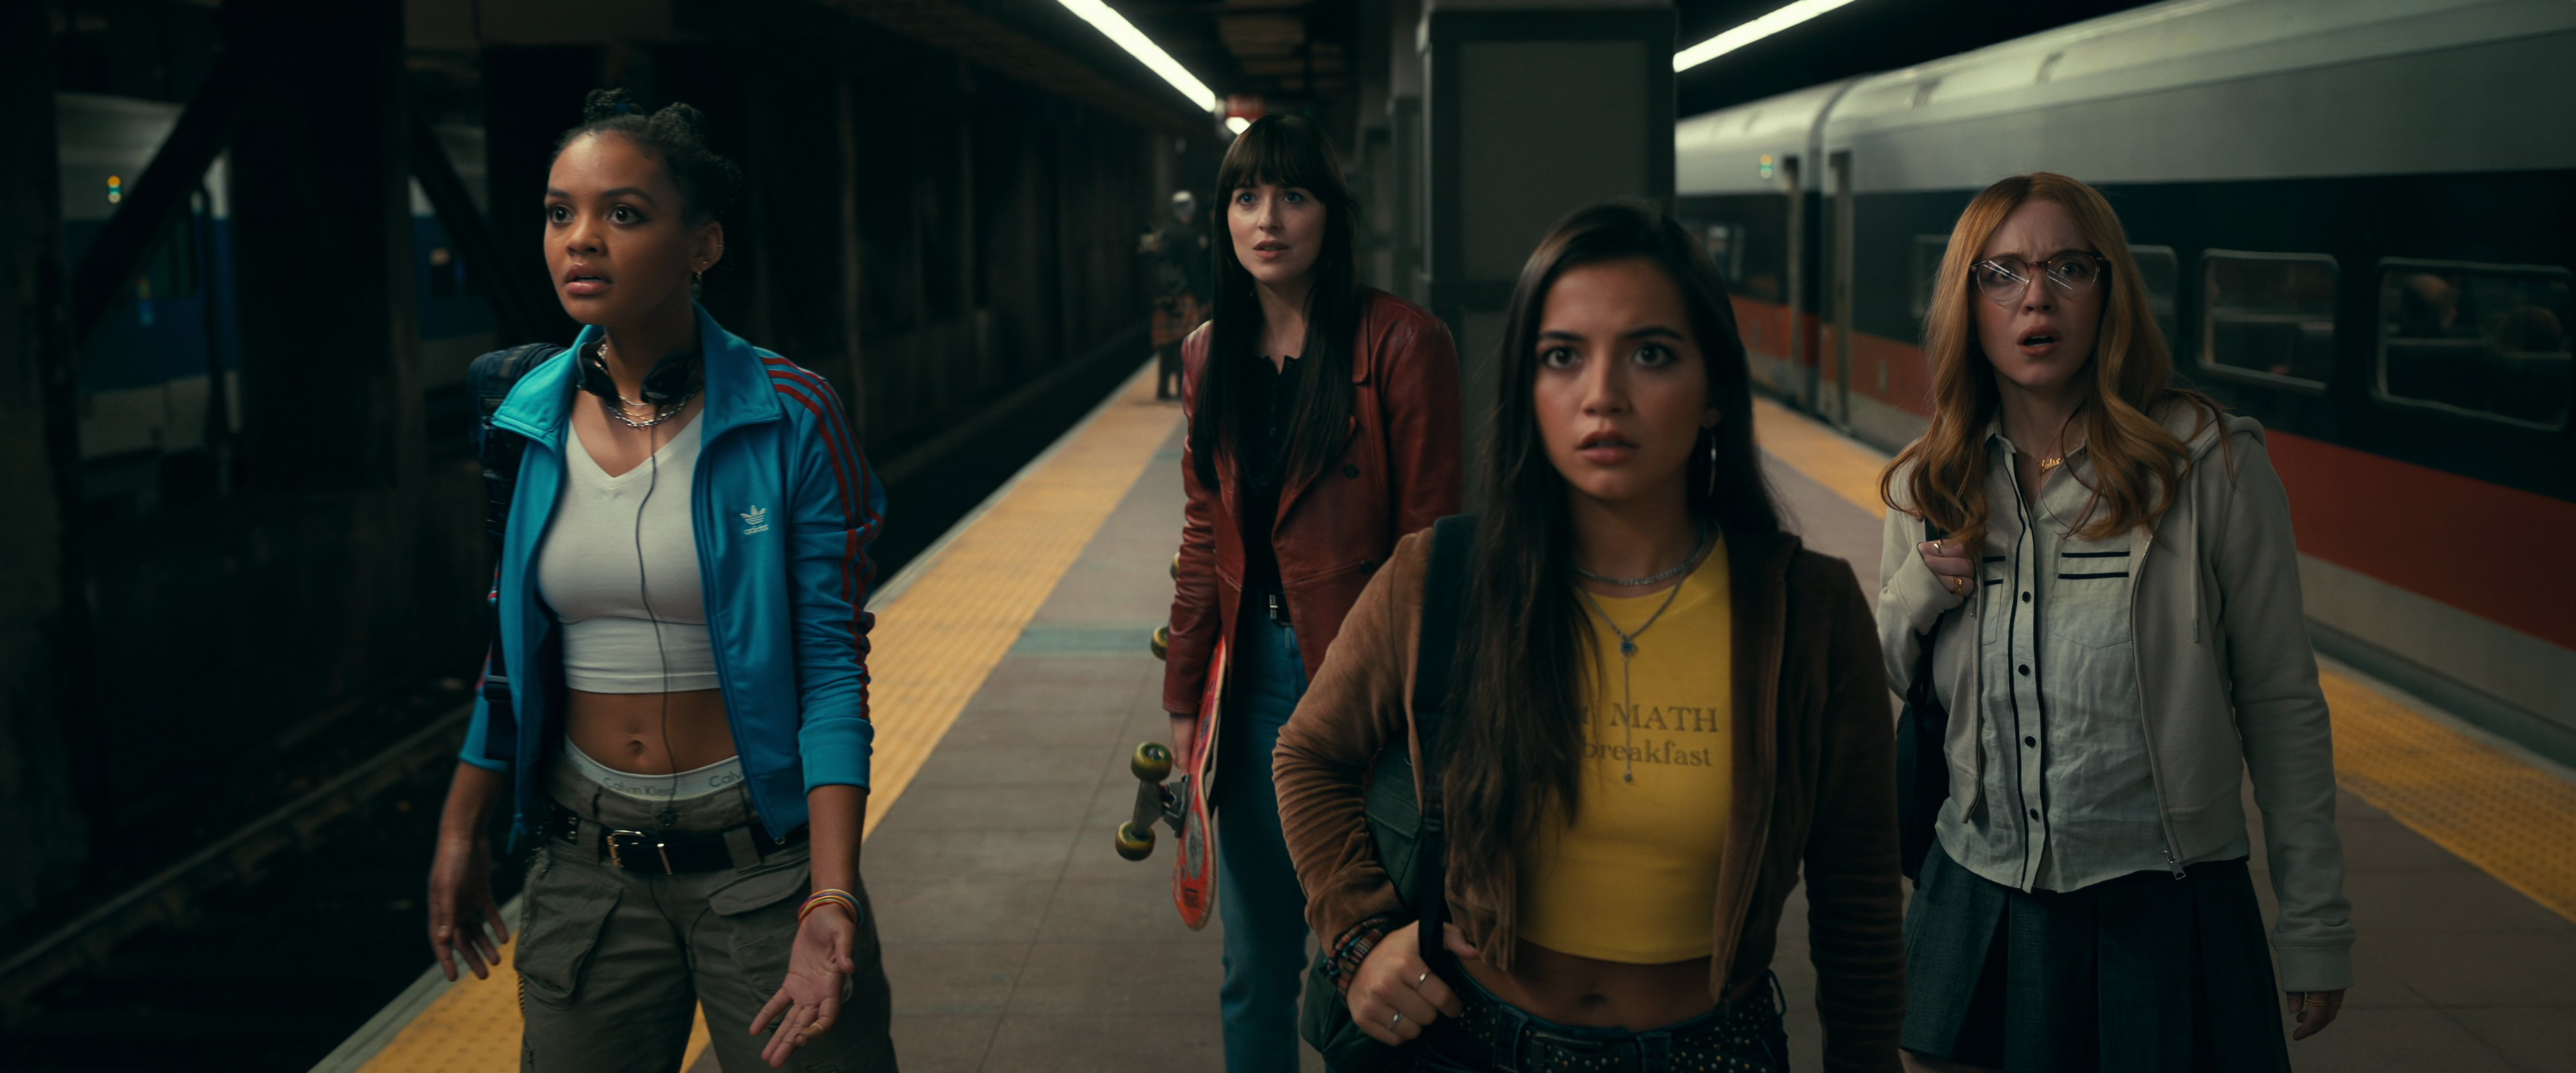 Four individuals stand on a subway platform, their faces not shown for privacy. One wears a blue jacket and grey pants, another a red top with a skateboard, the third a brown jacket and yellow top with text, and the fourth light-colored attire. An orange and white train is visible in the background, with ‘HEALTH & SAFETY’ text discernible, highlighting the urban commute environment.